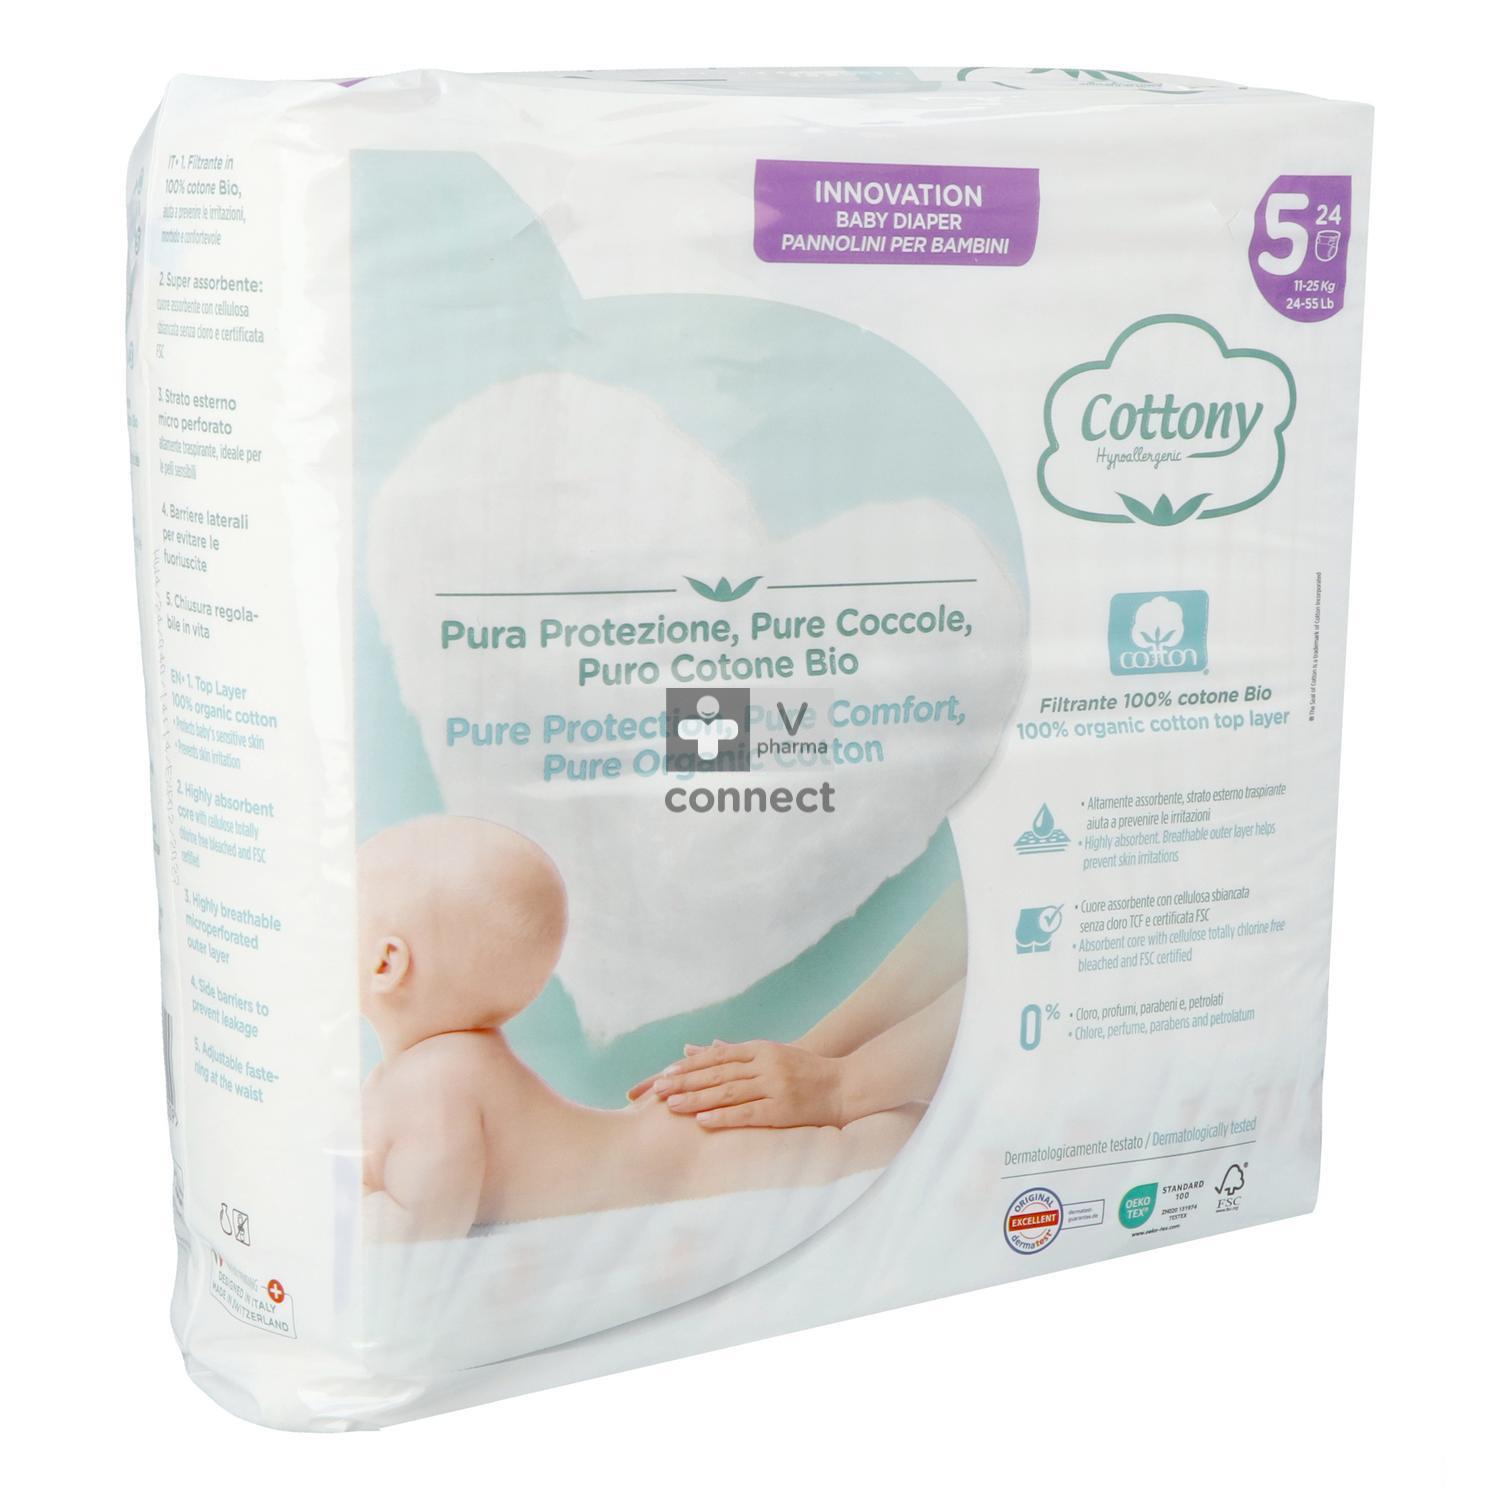 Cottony Baby Diapers Size 5 11 - 25kg 24